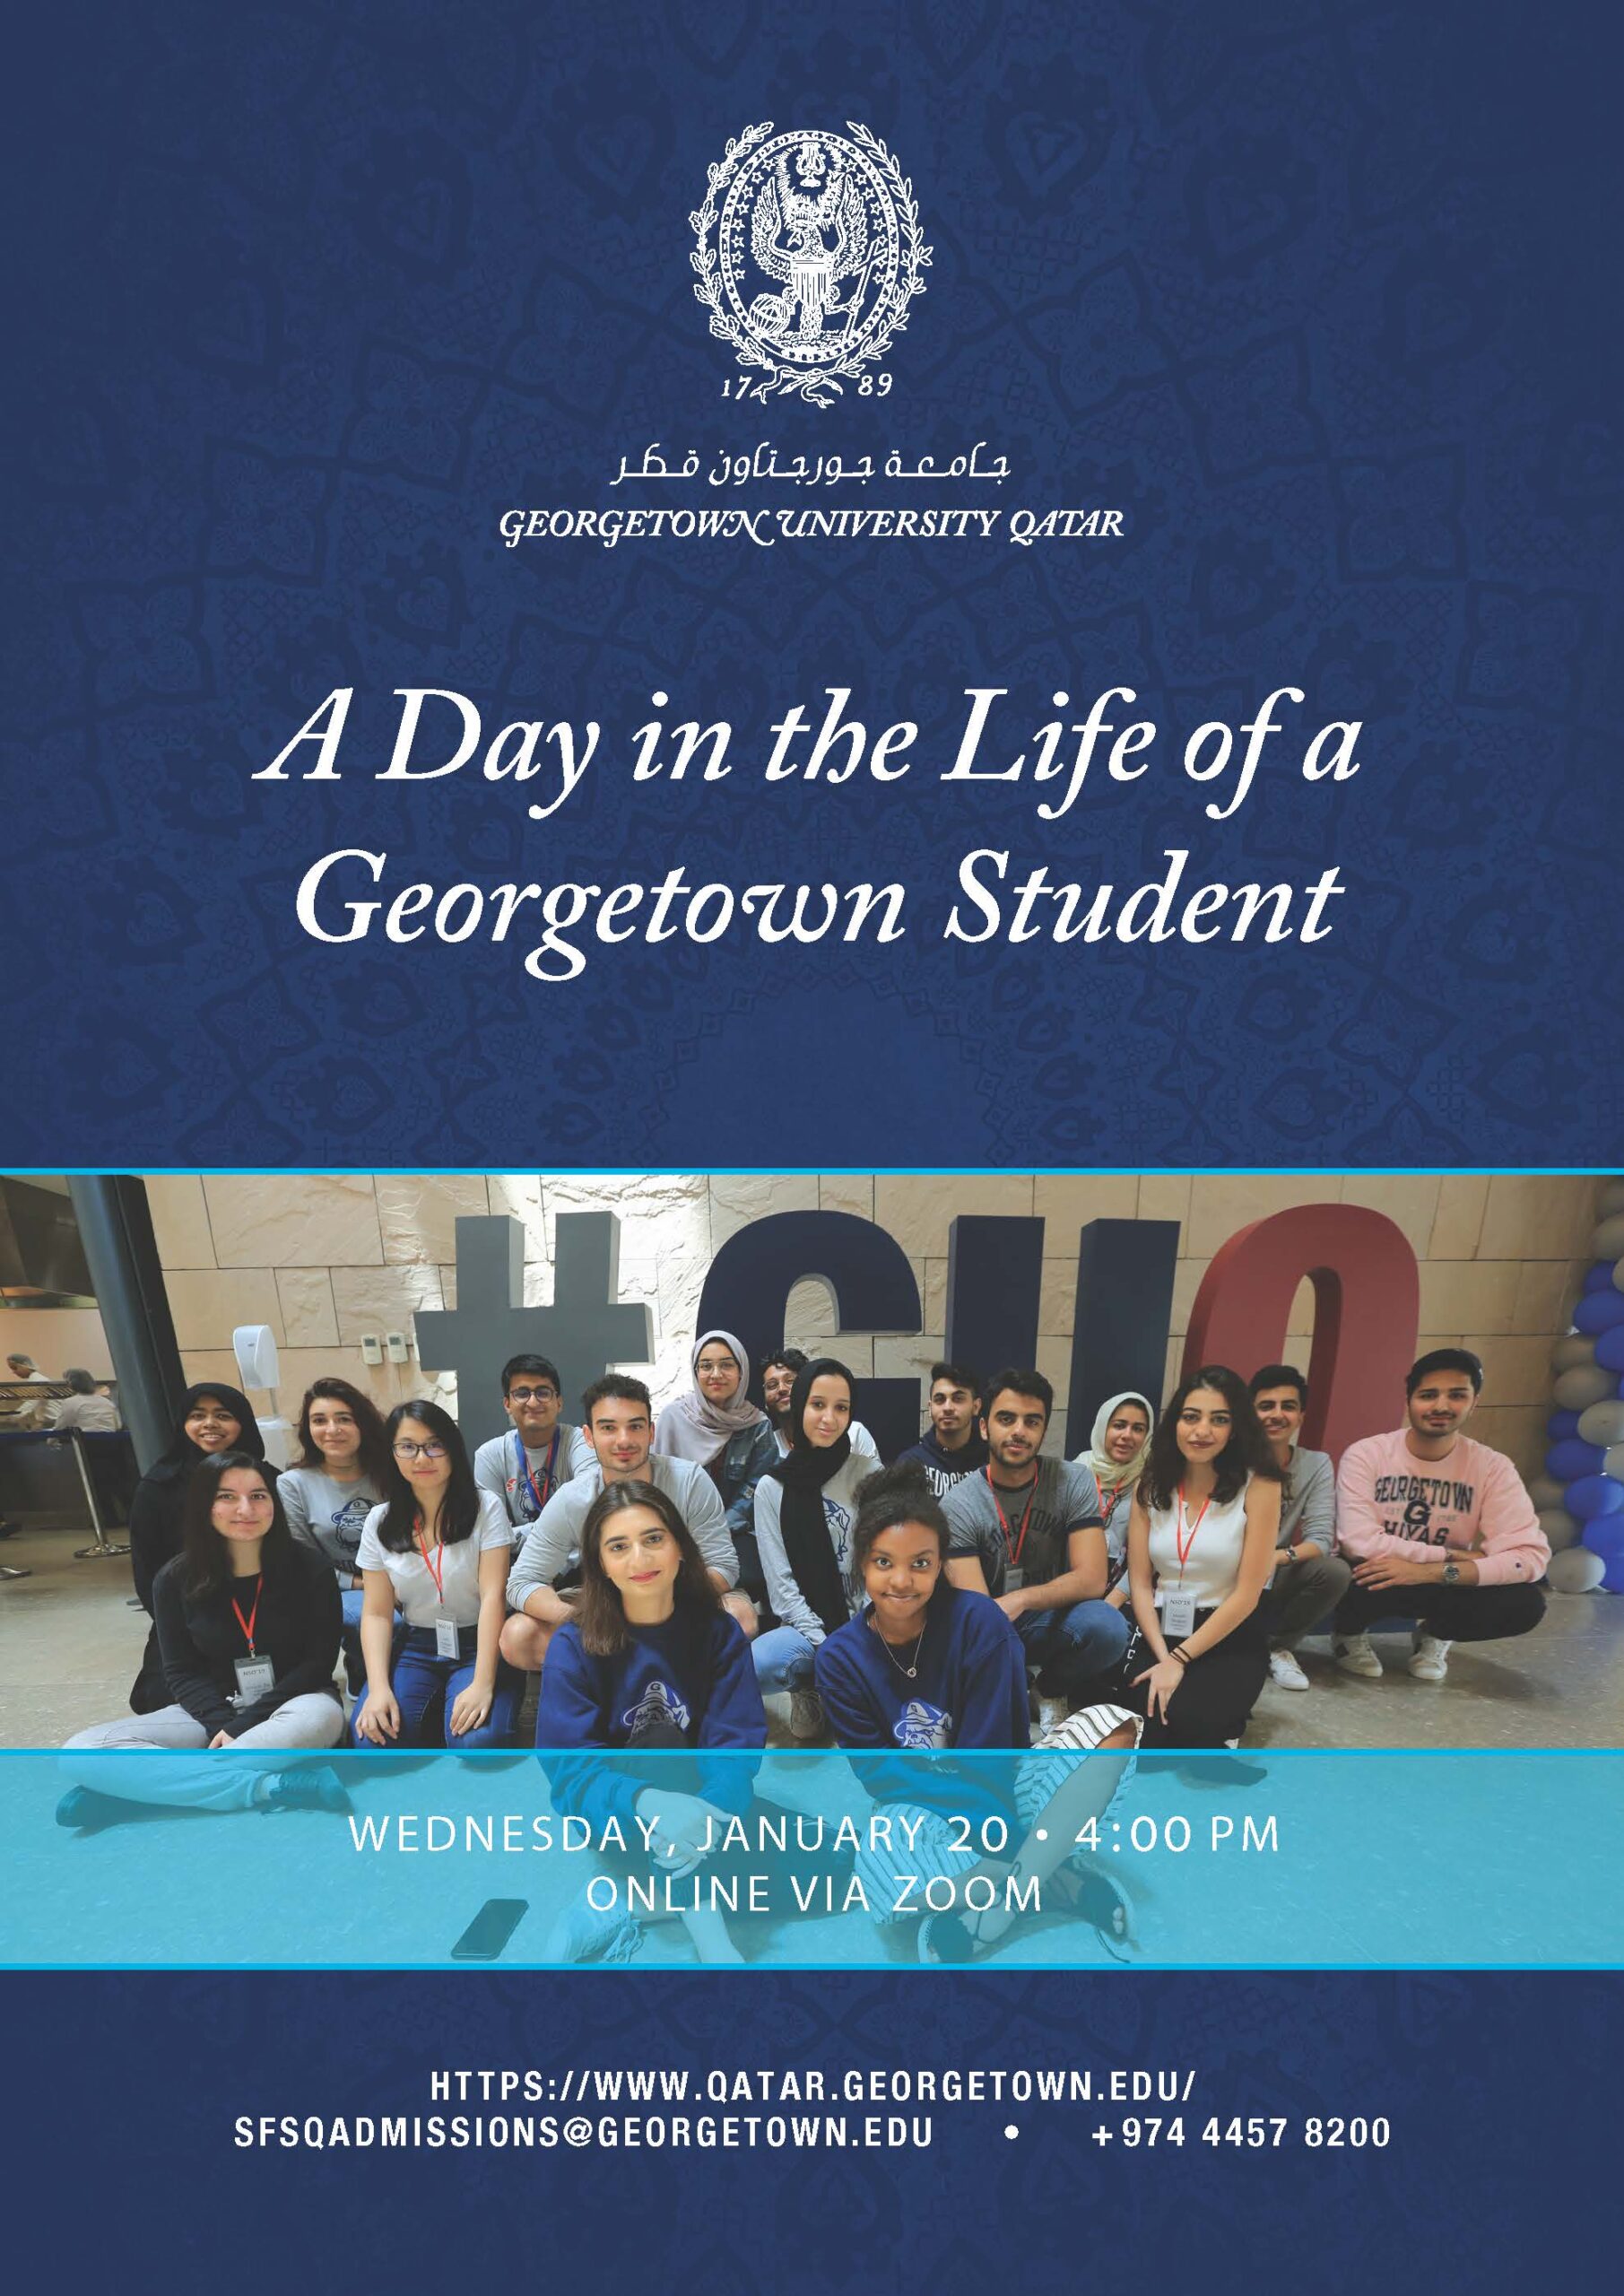 Image of Georgetown University in Qatar students sitting on the atrium floor as well as details about the event